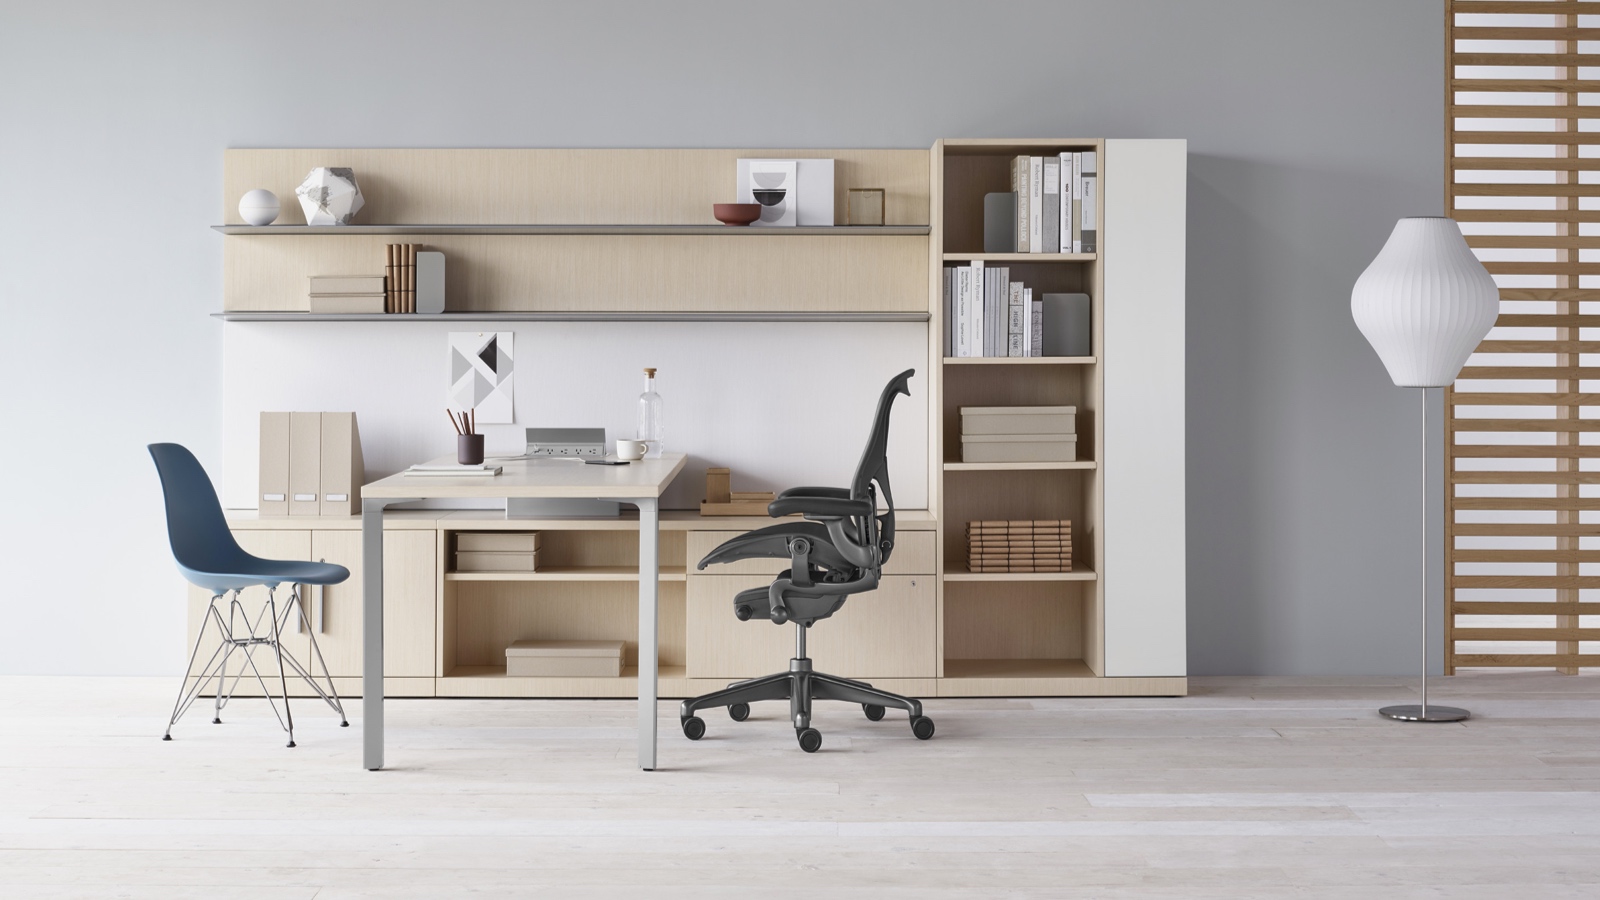 A Canvas Private Office with light wood storage, upper shelves, a black Aeron office chair, and a blue Eames Molded Plastic side chair. Select to go to the Private Workspaces page within the Canvas Lookbook.